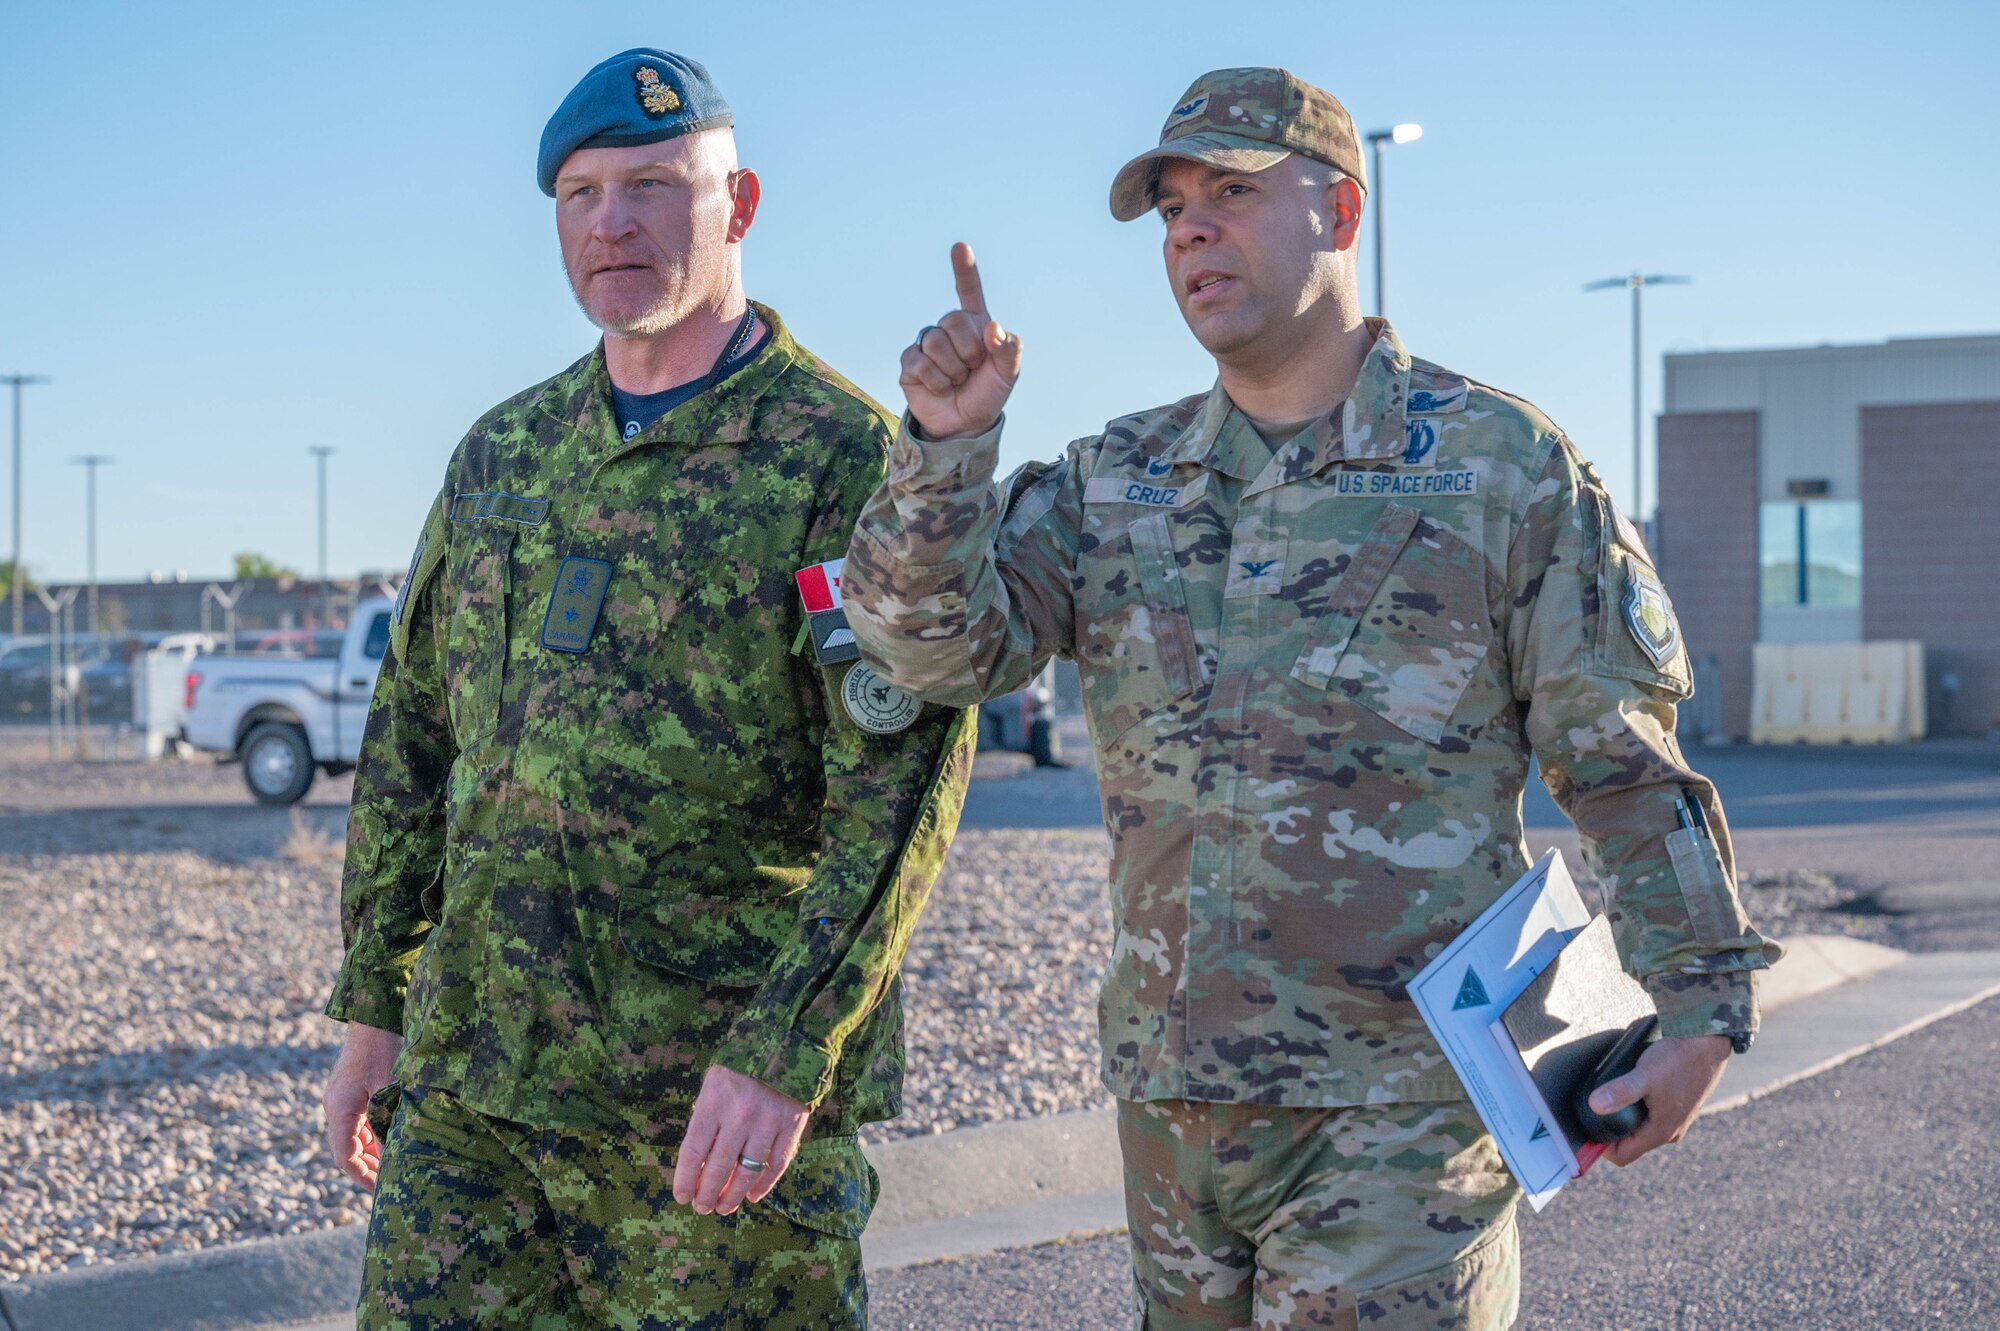 From left to right, Brig. Gen. Kyle Paul, Deputy Commanding General, Transformation, Space Operations Command, walks with Col. Miguel Cruz, Space Delta 4 commander, on their way to a mission brief at Buckley Space Force Base, Colo., Oct. 11, 2022. Paul is responsible for leading change within Headquarters Space Operations Command with a focus on data standards, policy, digital transformation, astrodynamics, military partnerships and international affairs, and innovation. (U.S. Space Force photo by Airman 1st Class Shaun Combs)